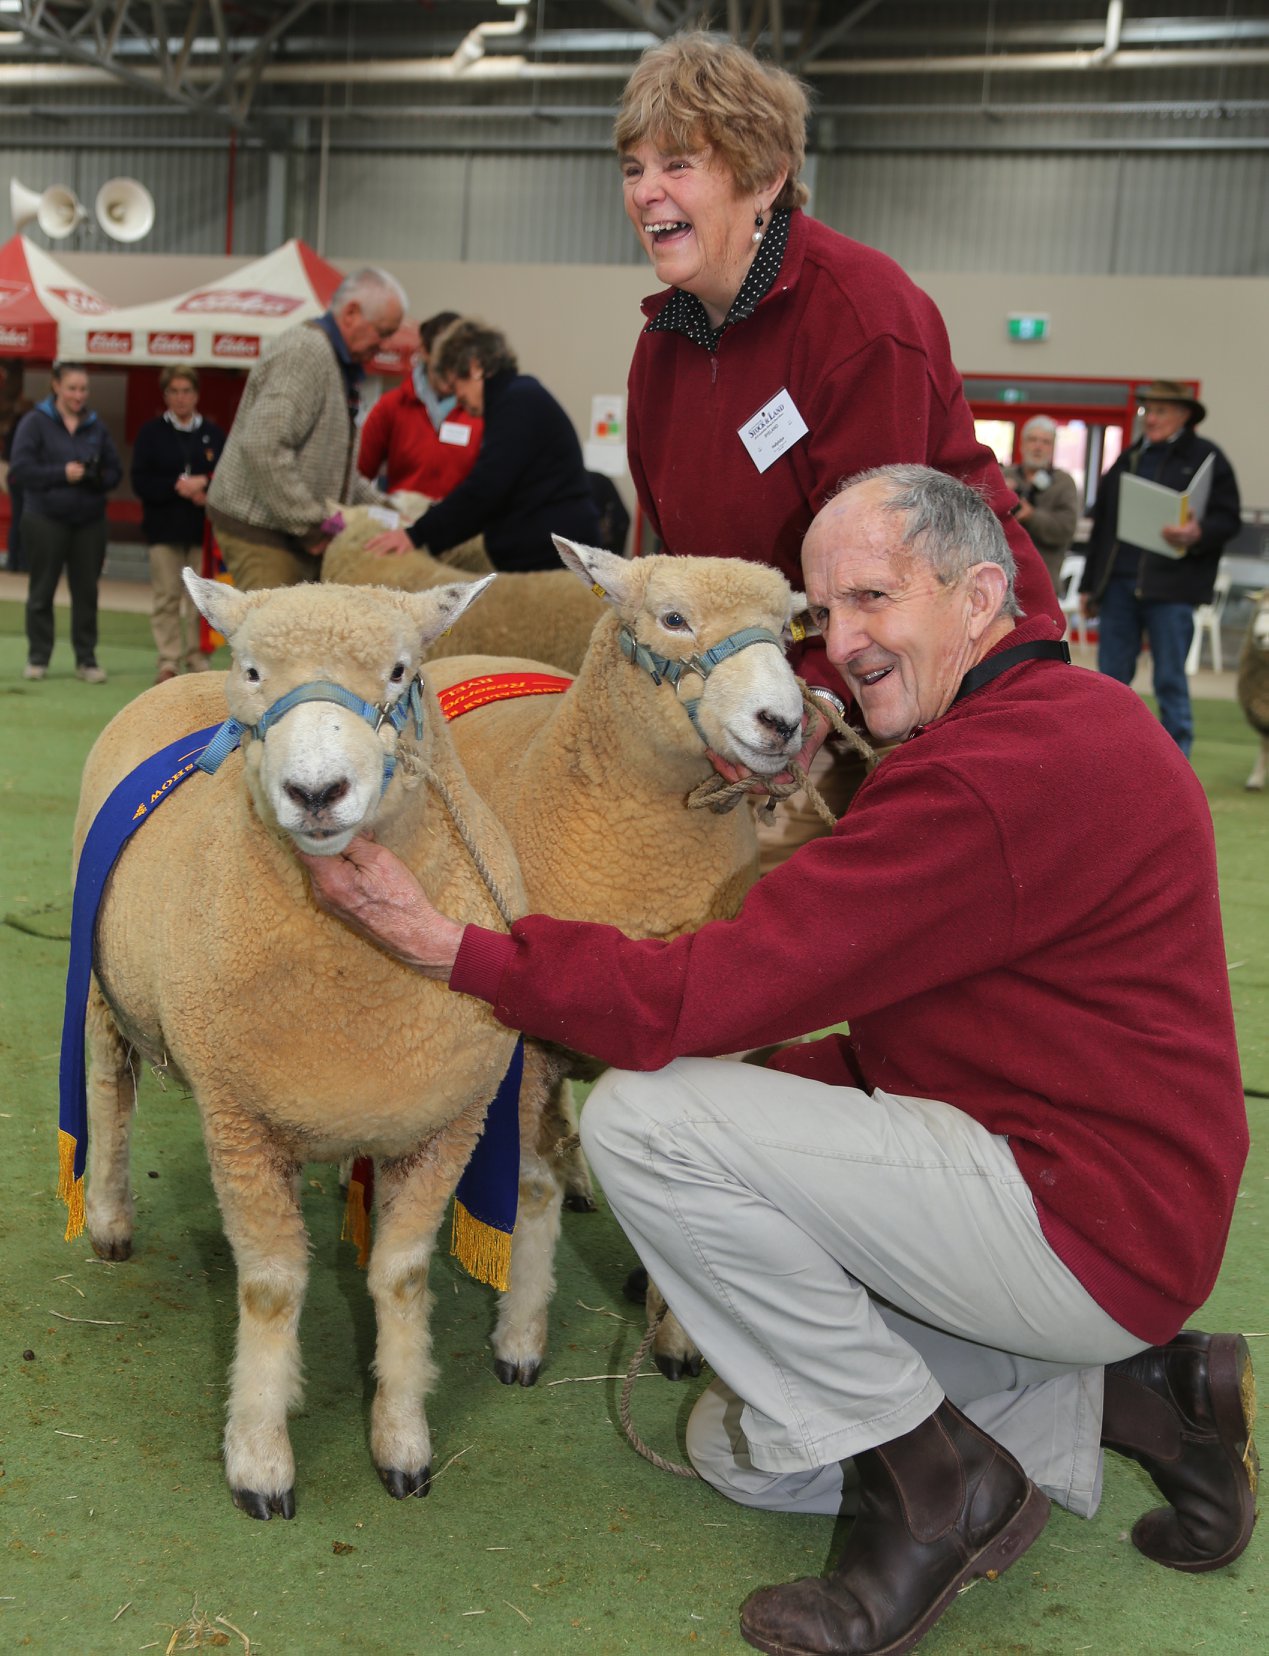 Des and Marilyn Stevens with their champion and reserve champion ewes. Source - Australian Sheep Magazine FB page.